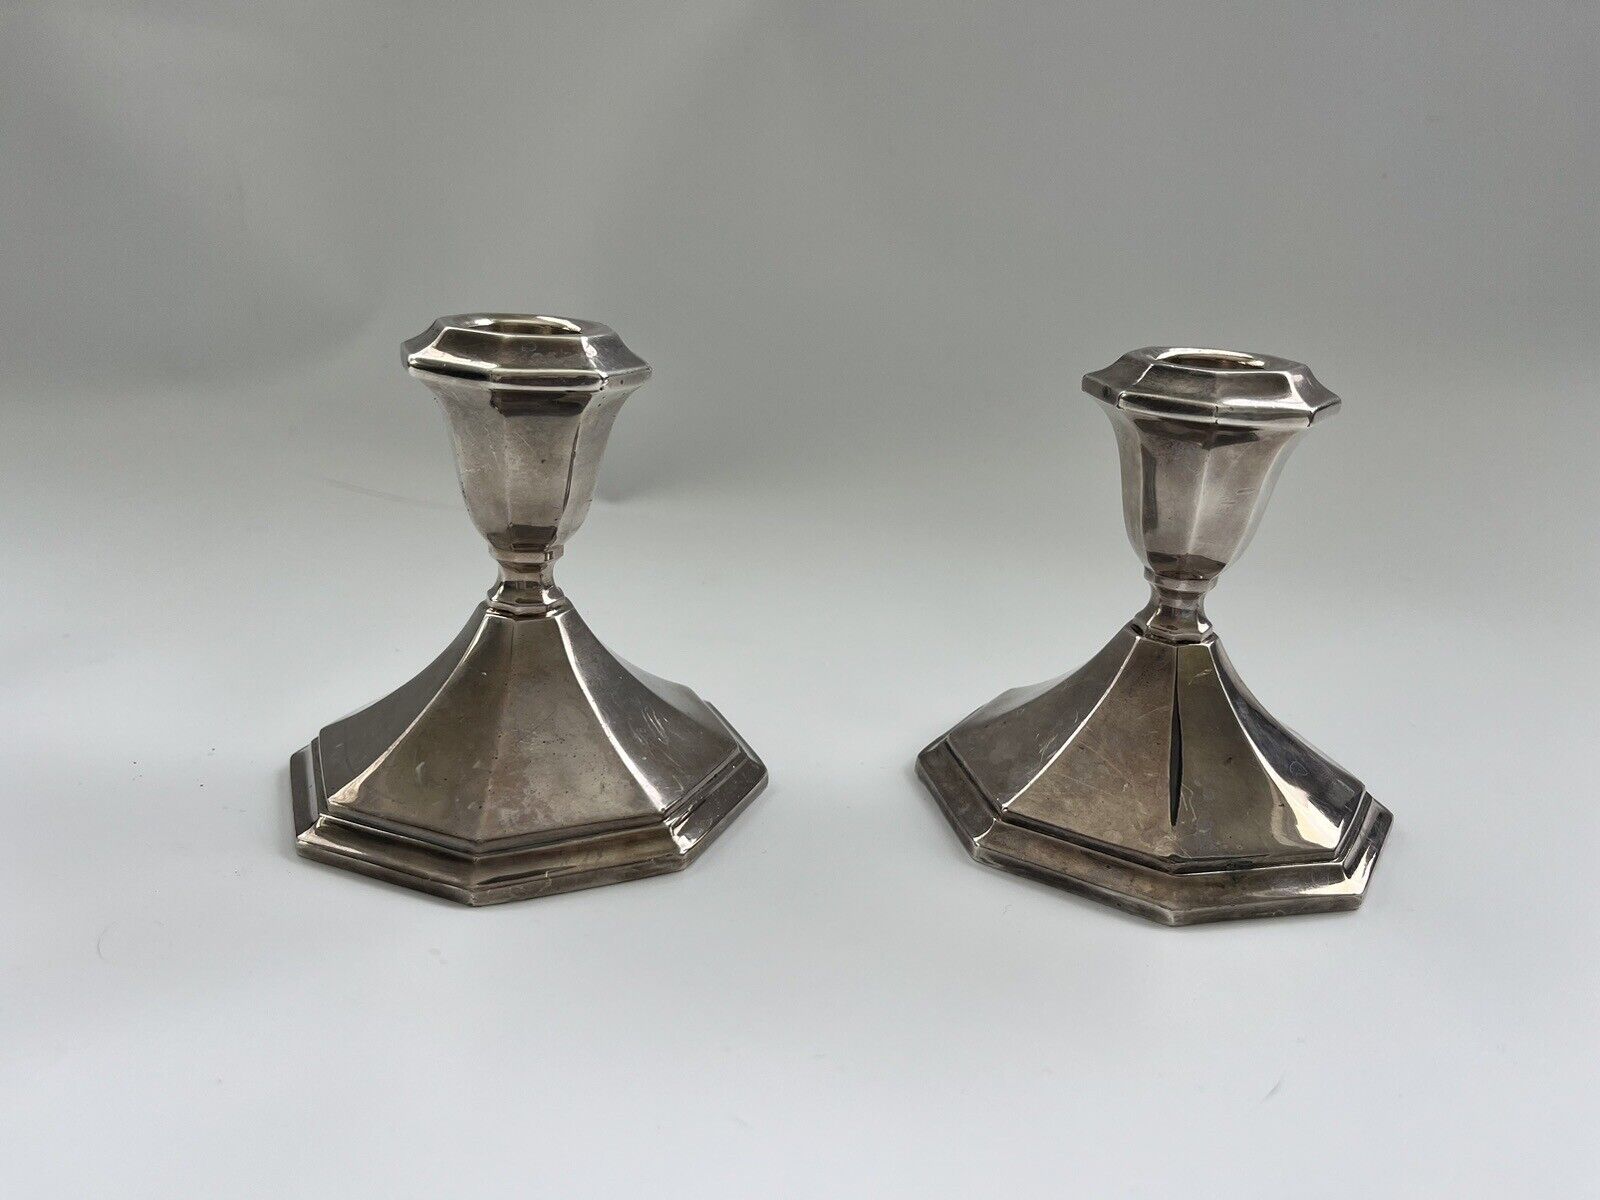 2 Heavy Wallace Bros Silverplate 5010 Alden Design Console Candle Holders